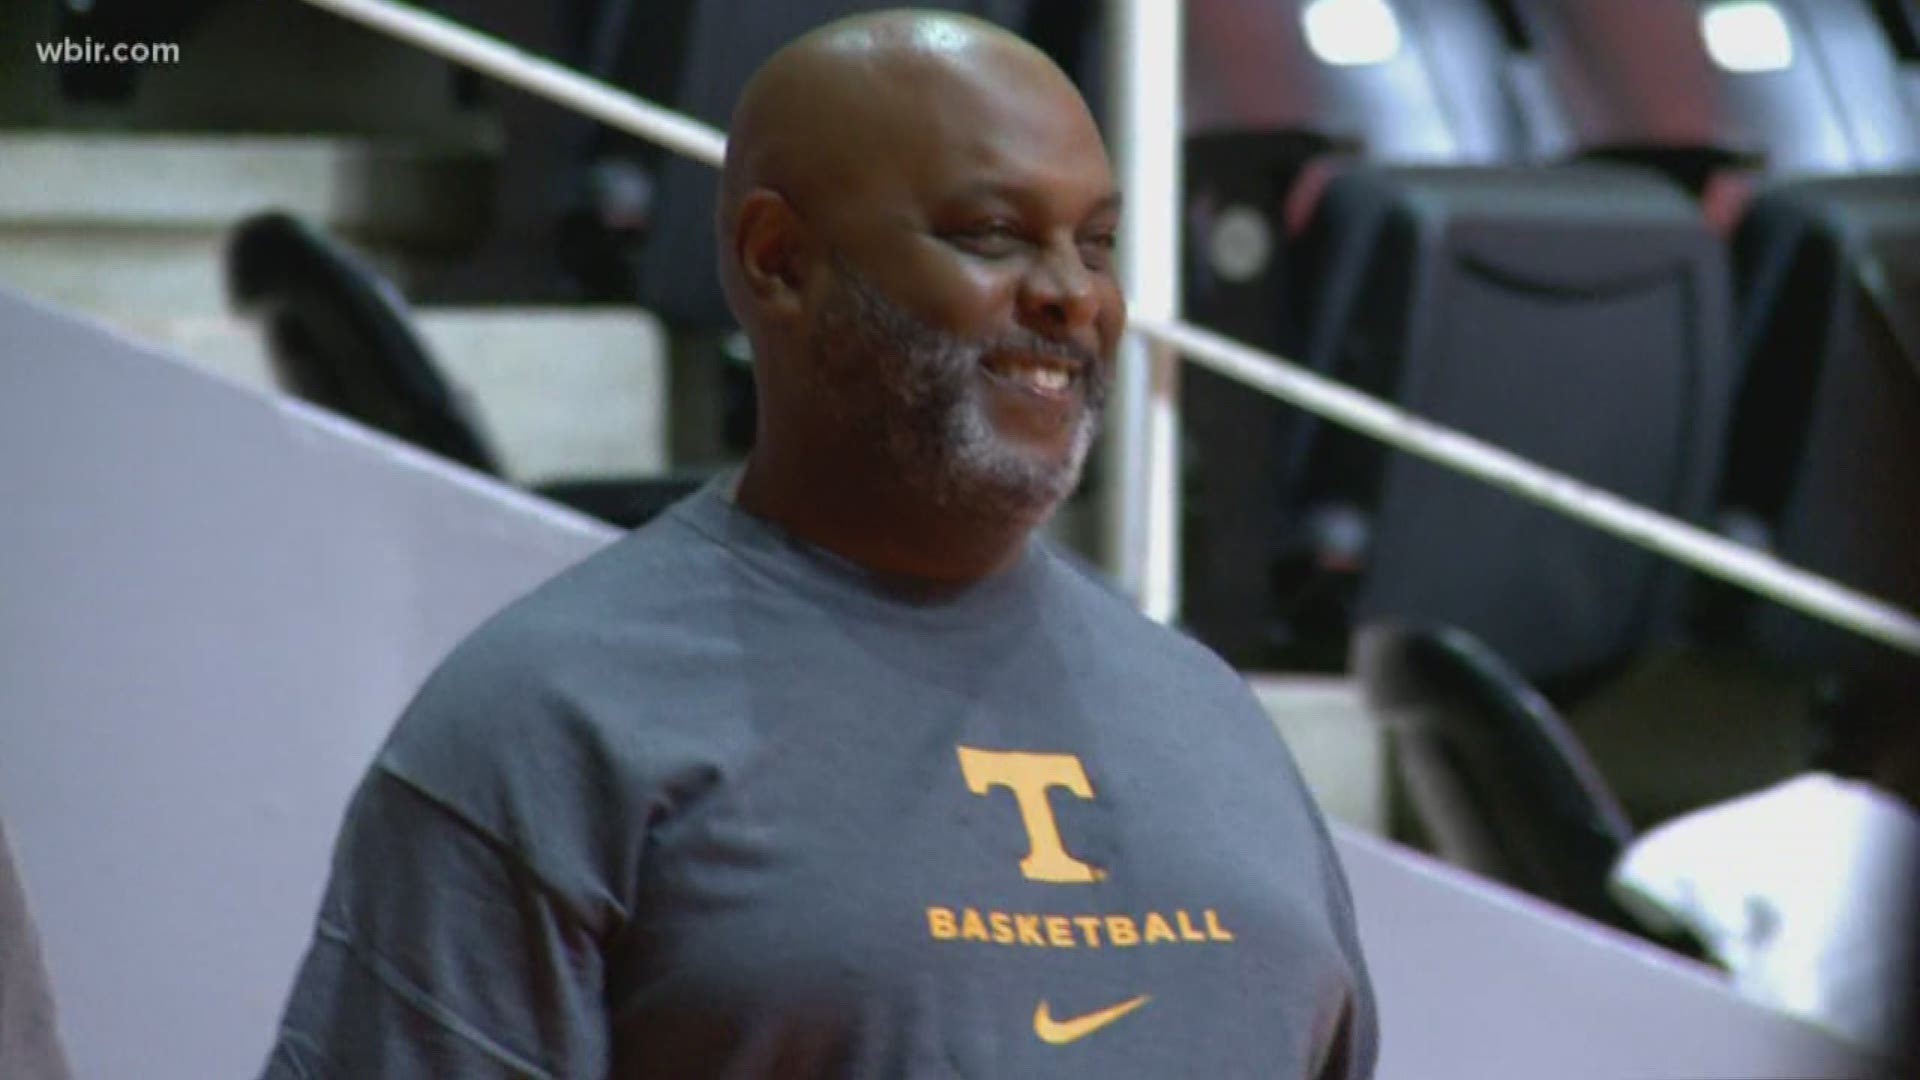 Hear from a father-son duo spend their Father's Day with the team they love, the Tennessee Volunteers.